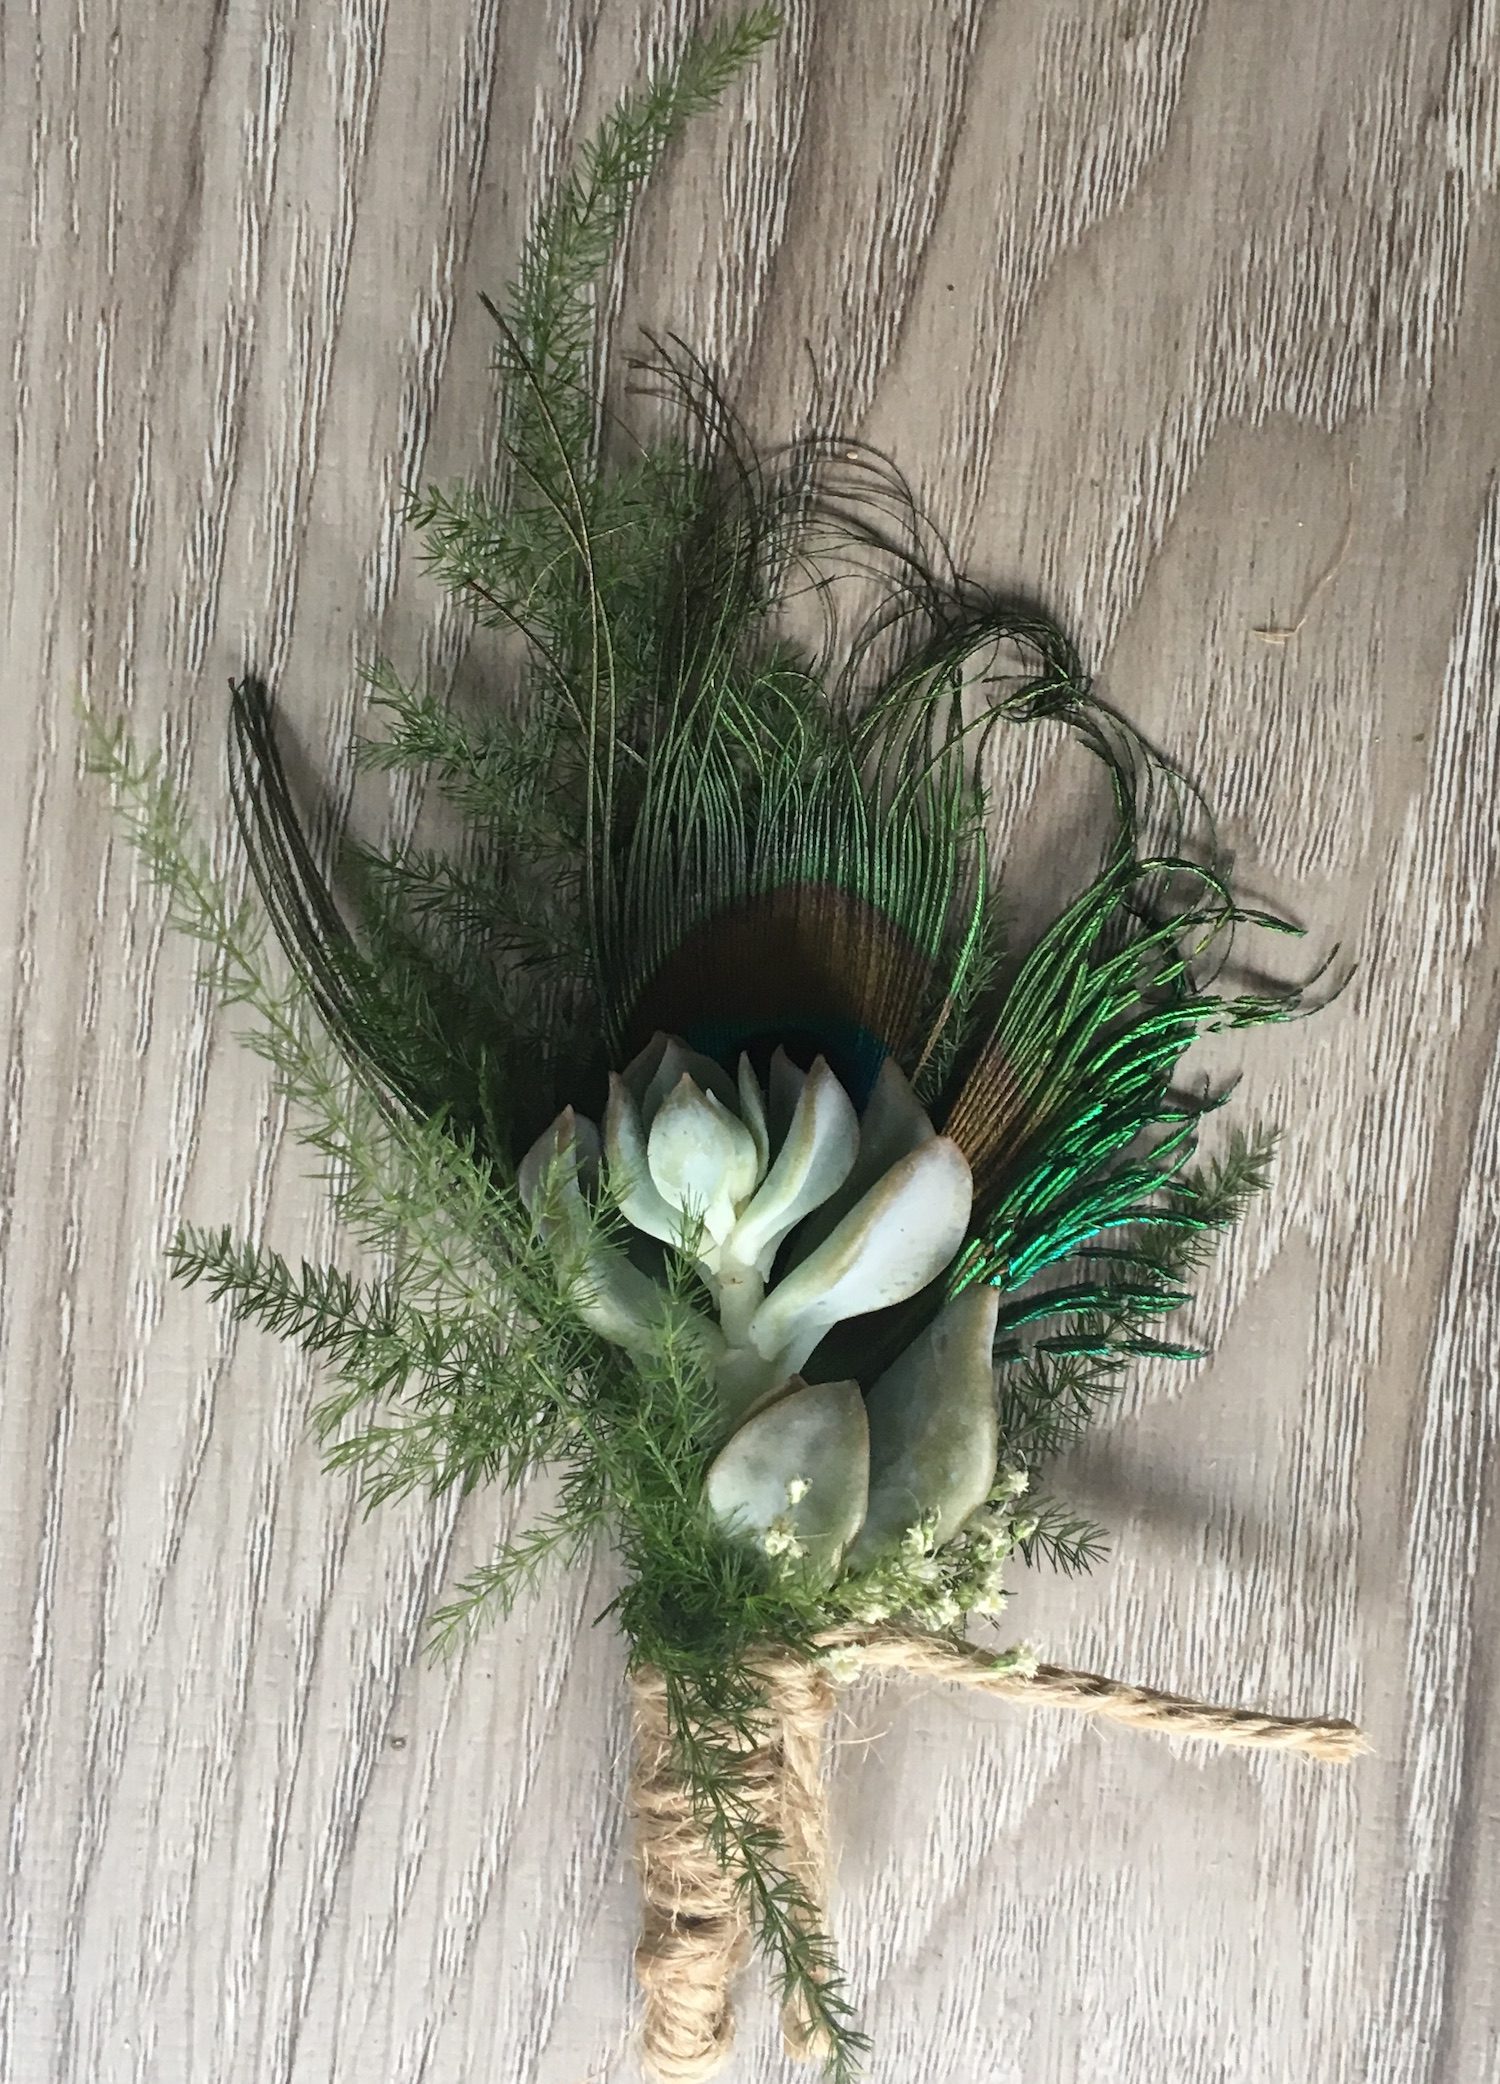 The Boutonniere with Peacock Feather for a hint of teal.